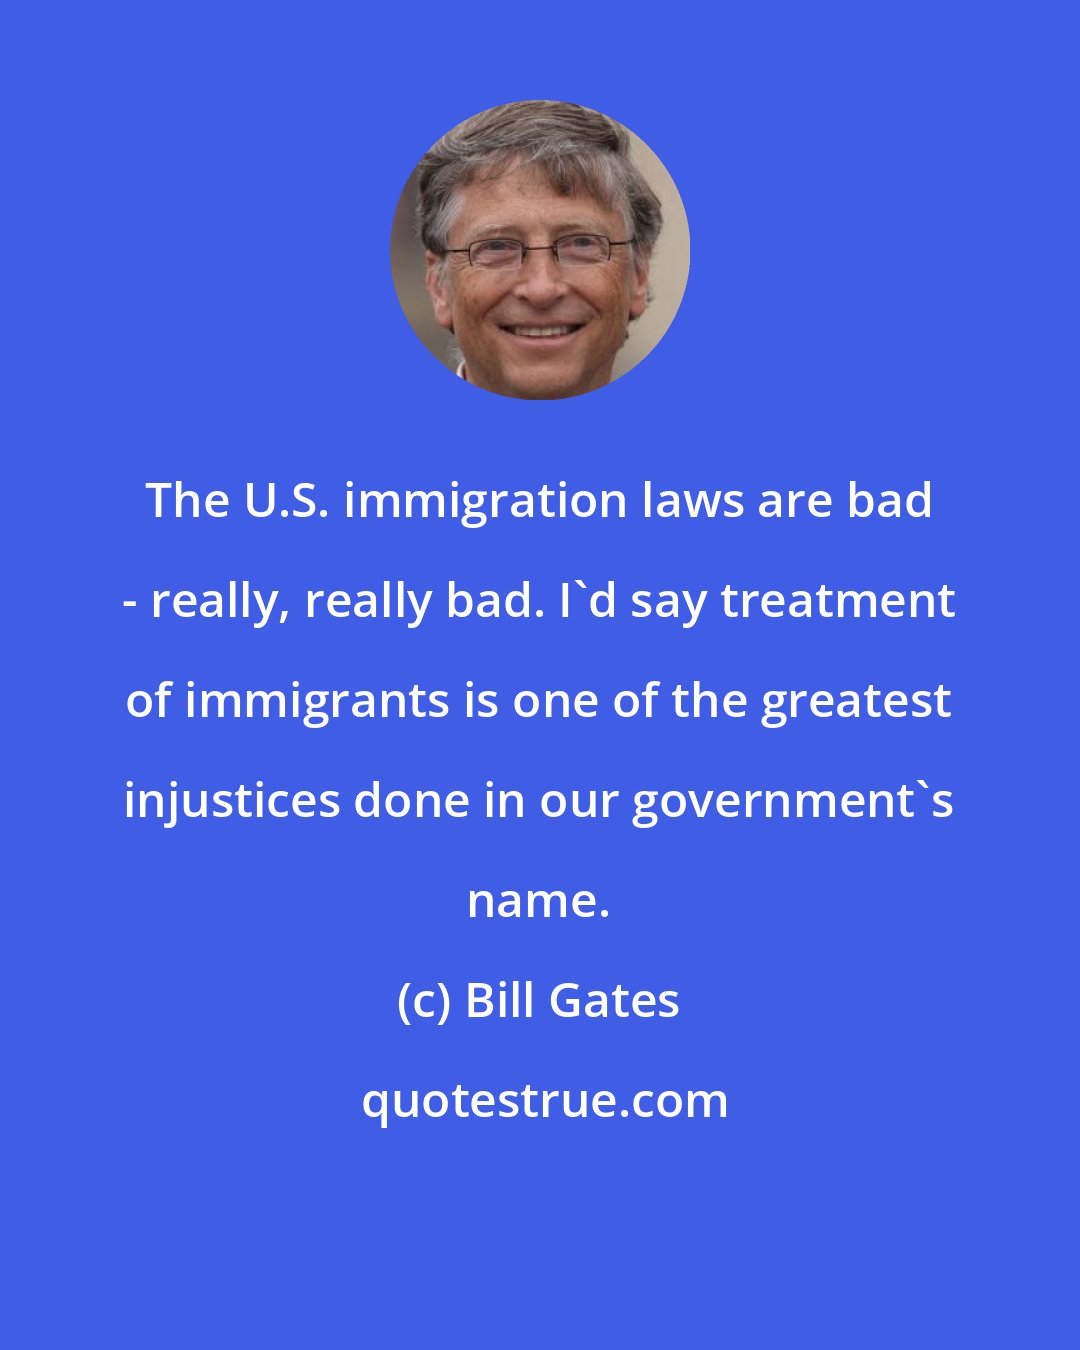 Bill Gates: The U.S. immigration laws are bad - really, really bad. I'd say treatment of immigrants is one of the greatest injustices done in our government's name.